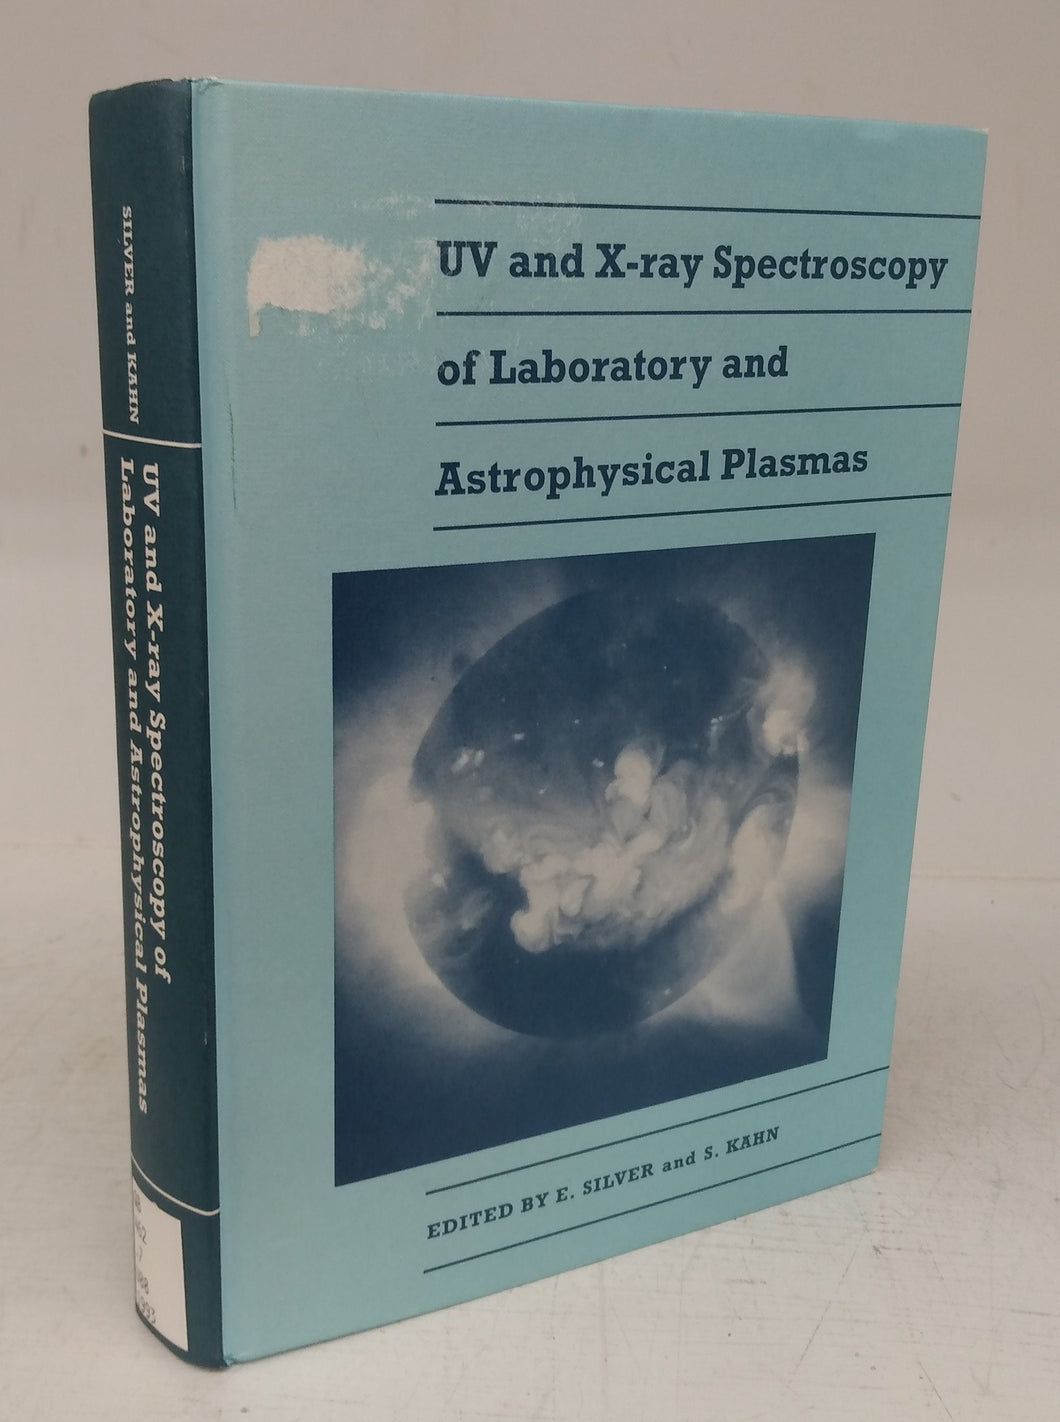 UV and X-ray Spectroscopy of Laboratory and Astrophysical Plasmas